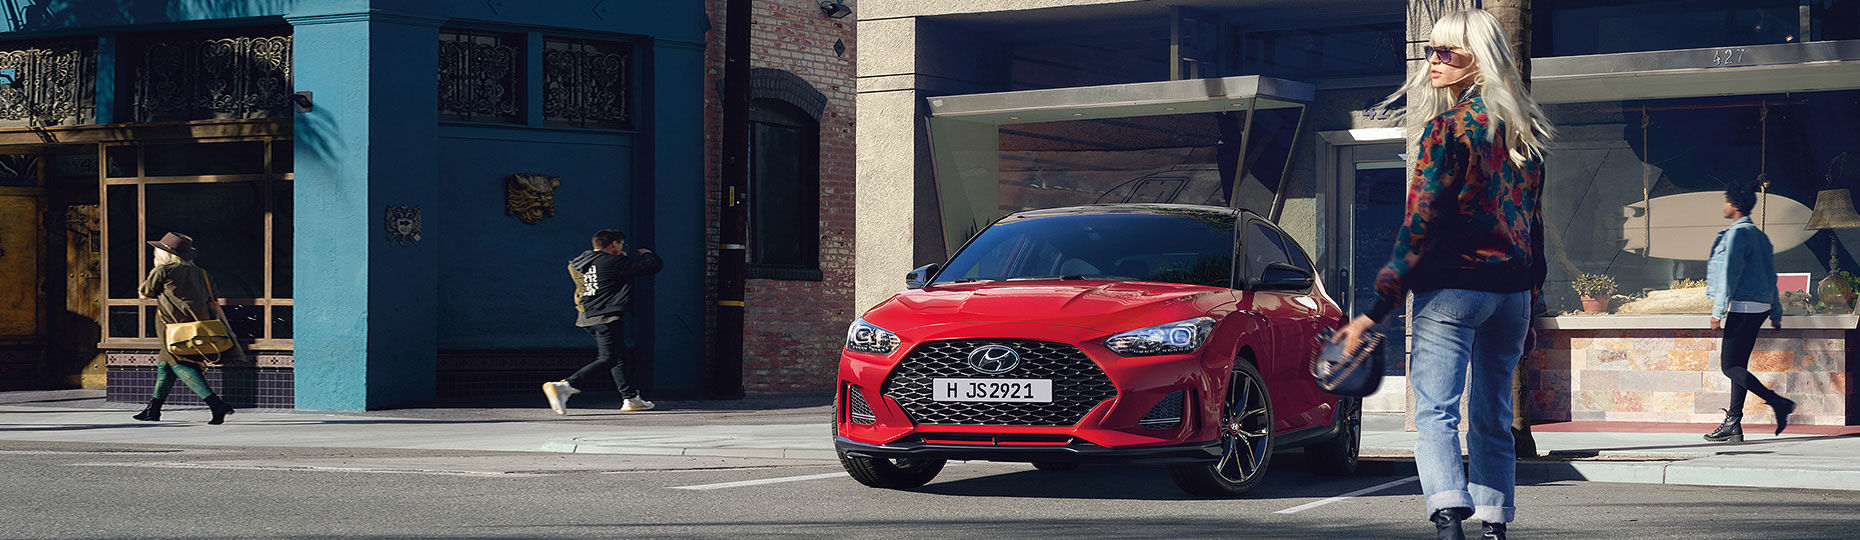 The All-New VELOSTER